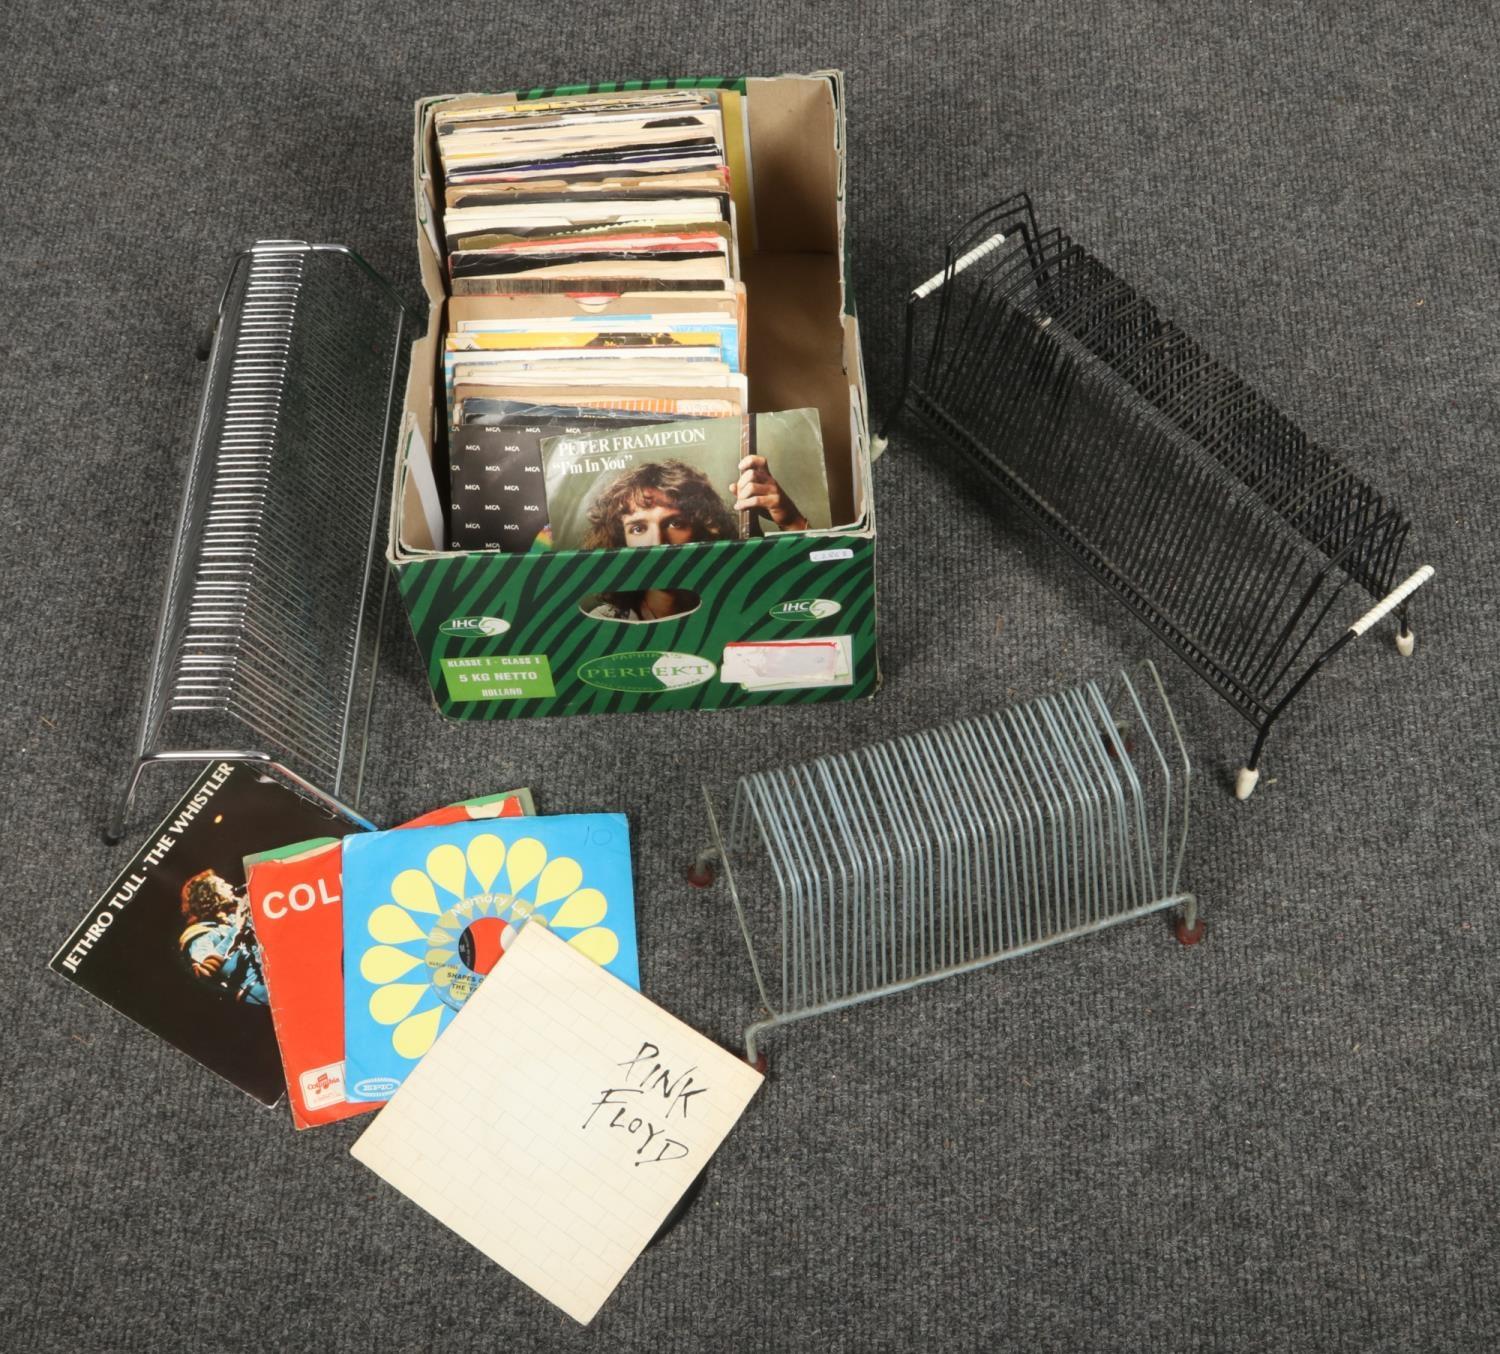 A box of Rock single records, to include The Rolling Stones, Pink Floyd, Guns N' Roses etc. along